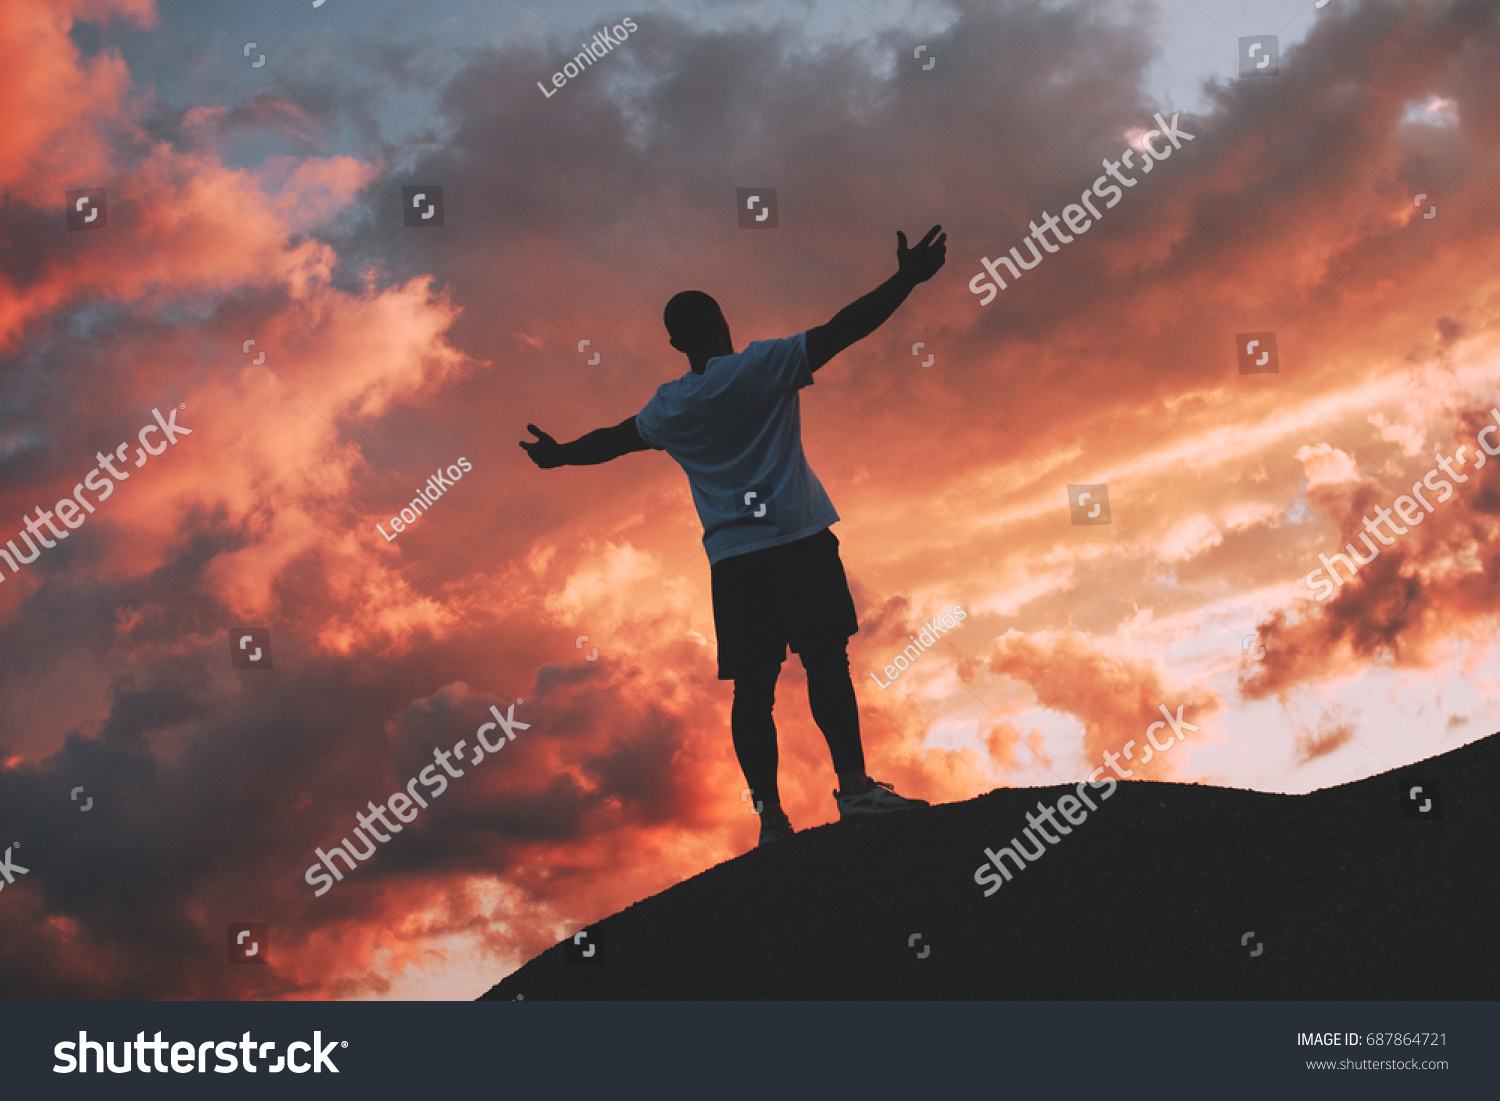 Successful and happy male athlete stands with his arms raised to the sunset #687864721